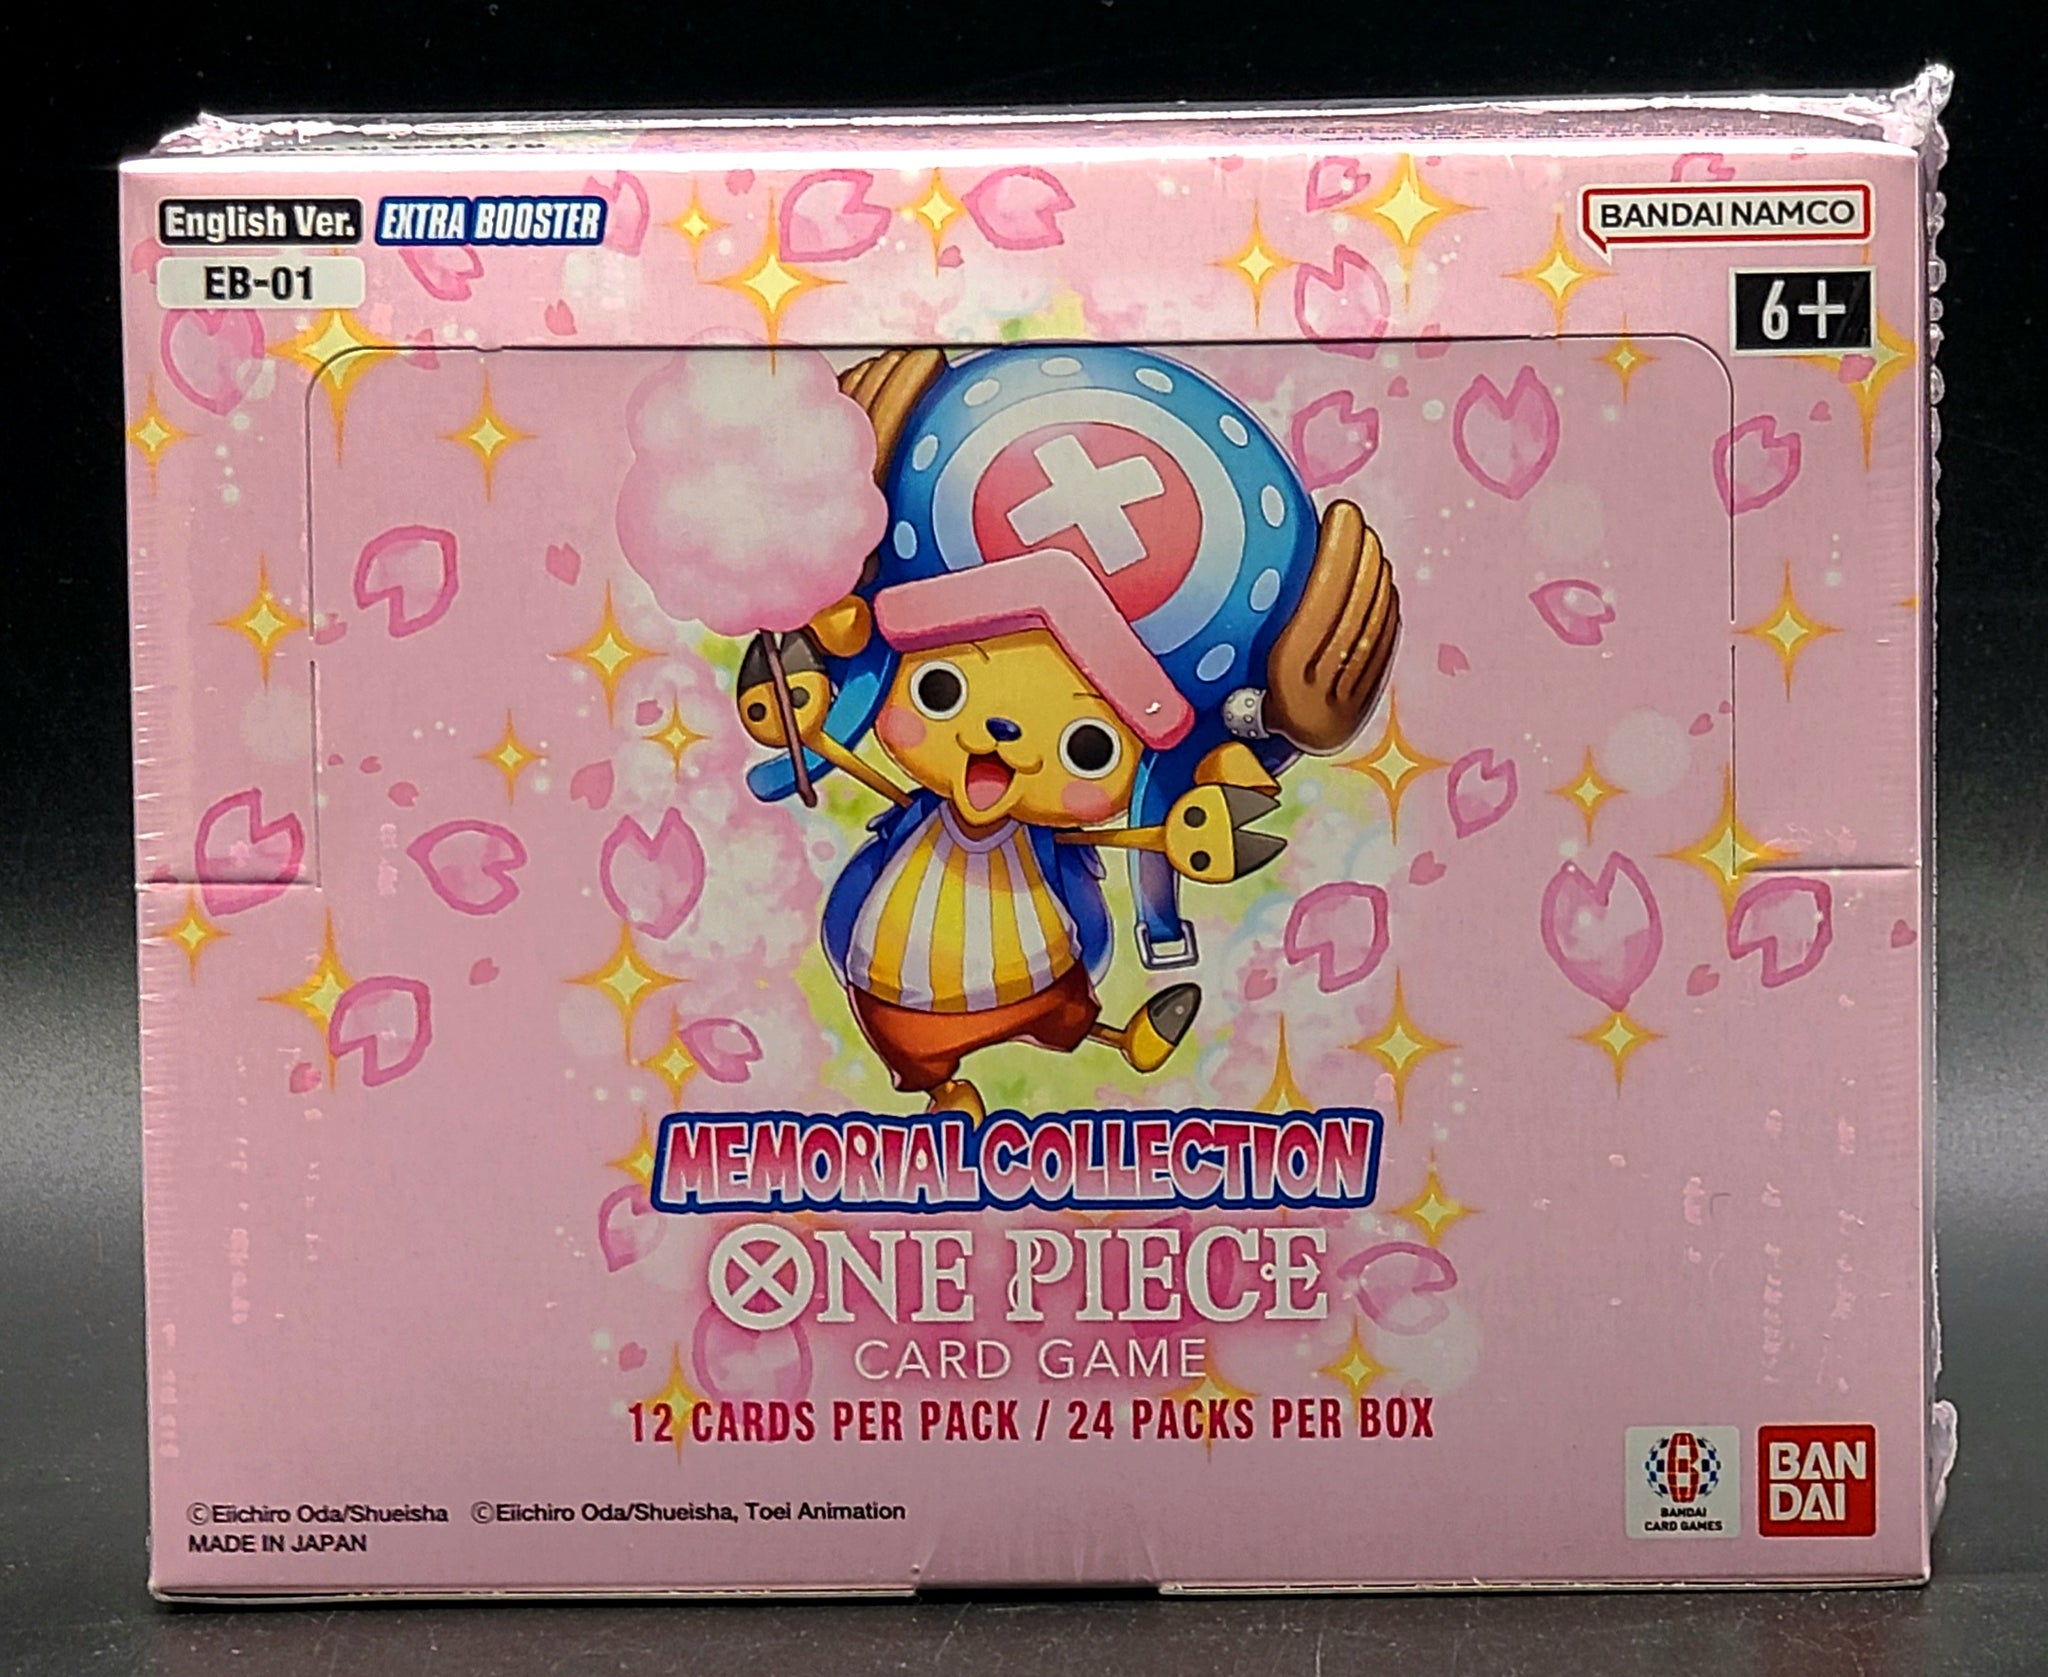 One Piece: Memorial Collection Booster Box EB-01